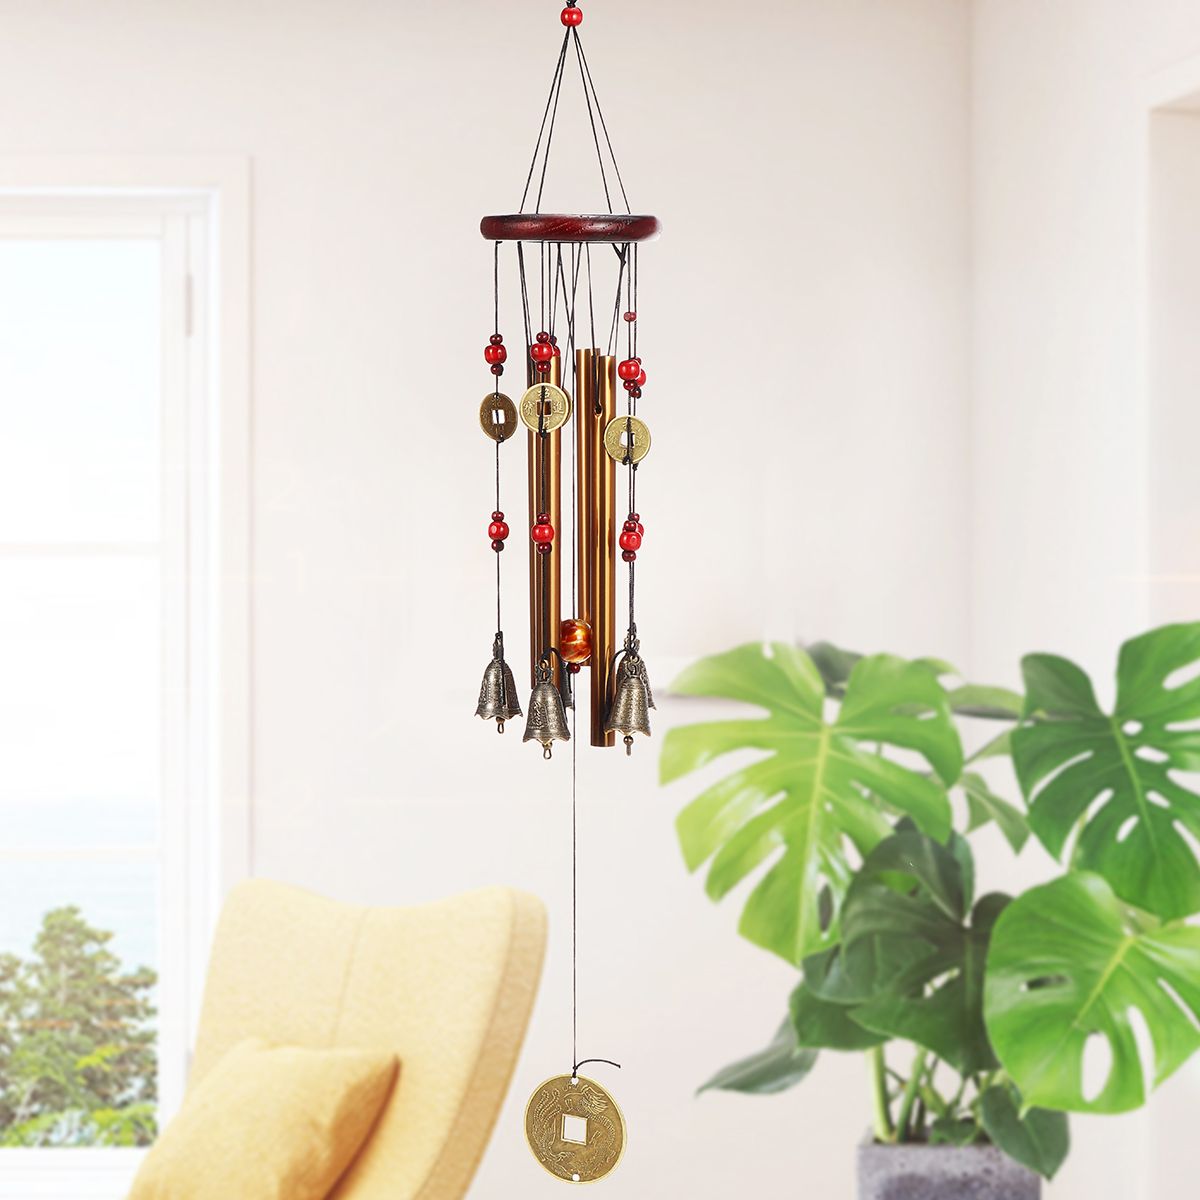 Solid-Wood-Bronze-Wind-Chimes-Hanging-Ornament-Yard-Garden-Decor-Gift-1719570